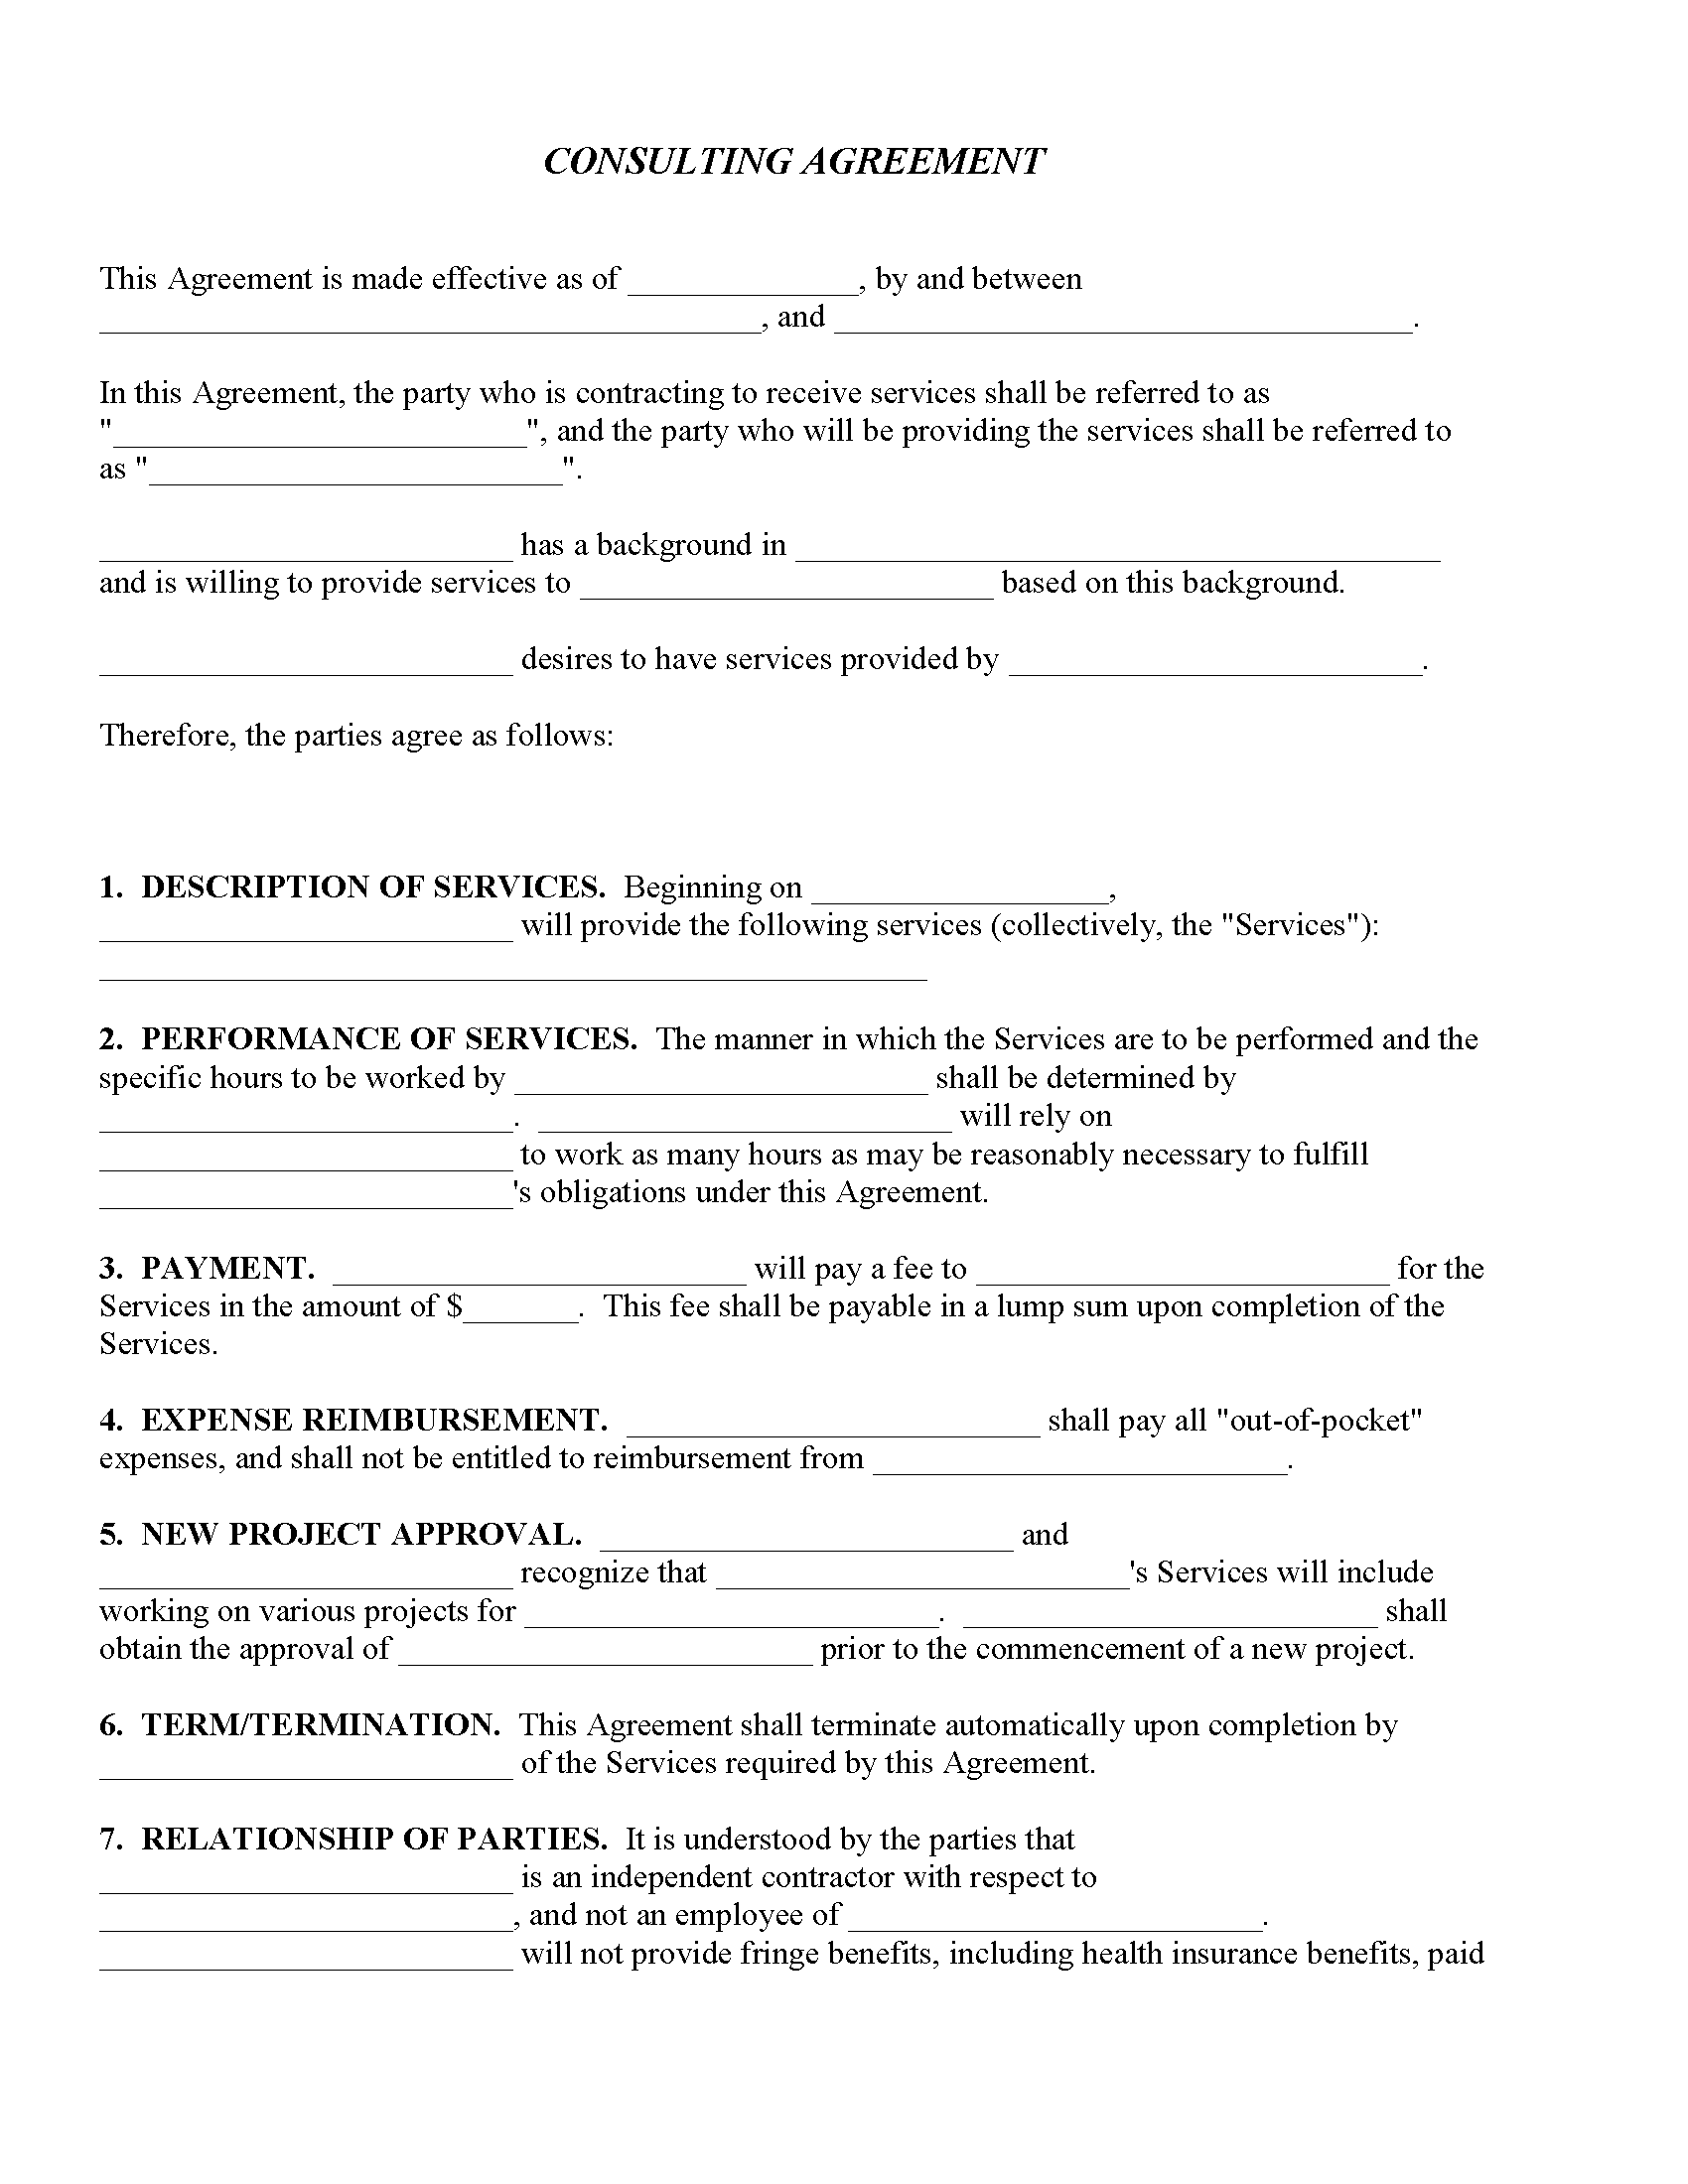 consulting-agreement-form-free-printable-legal-forms